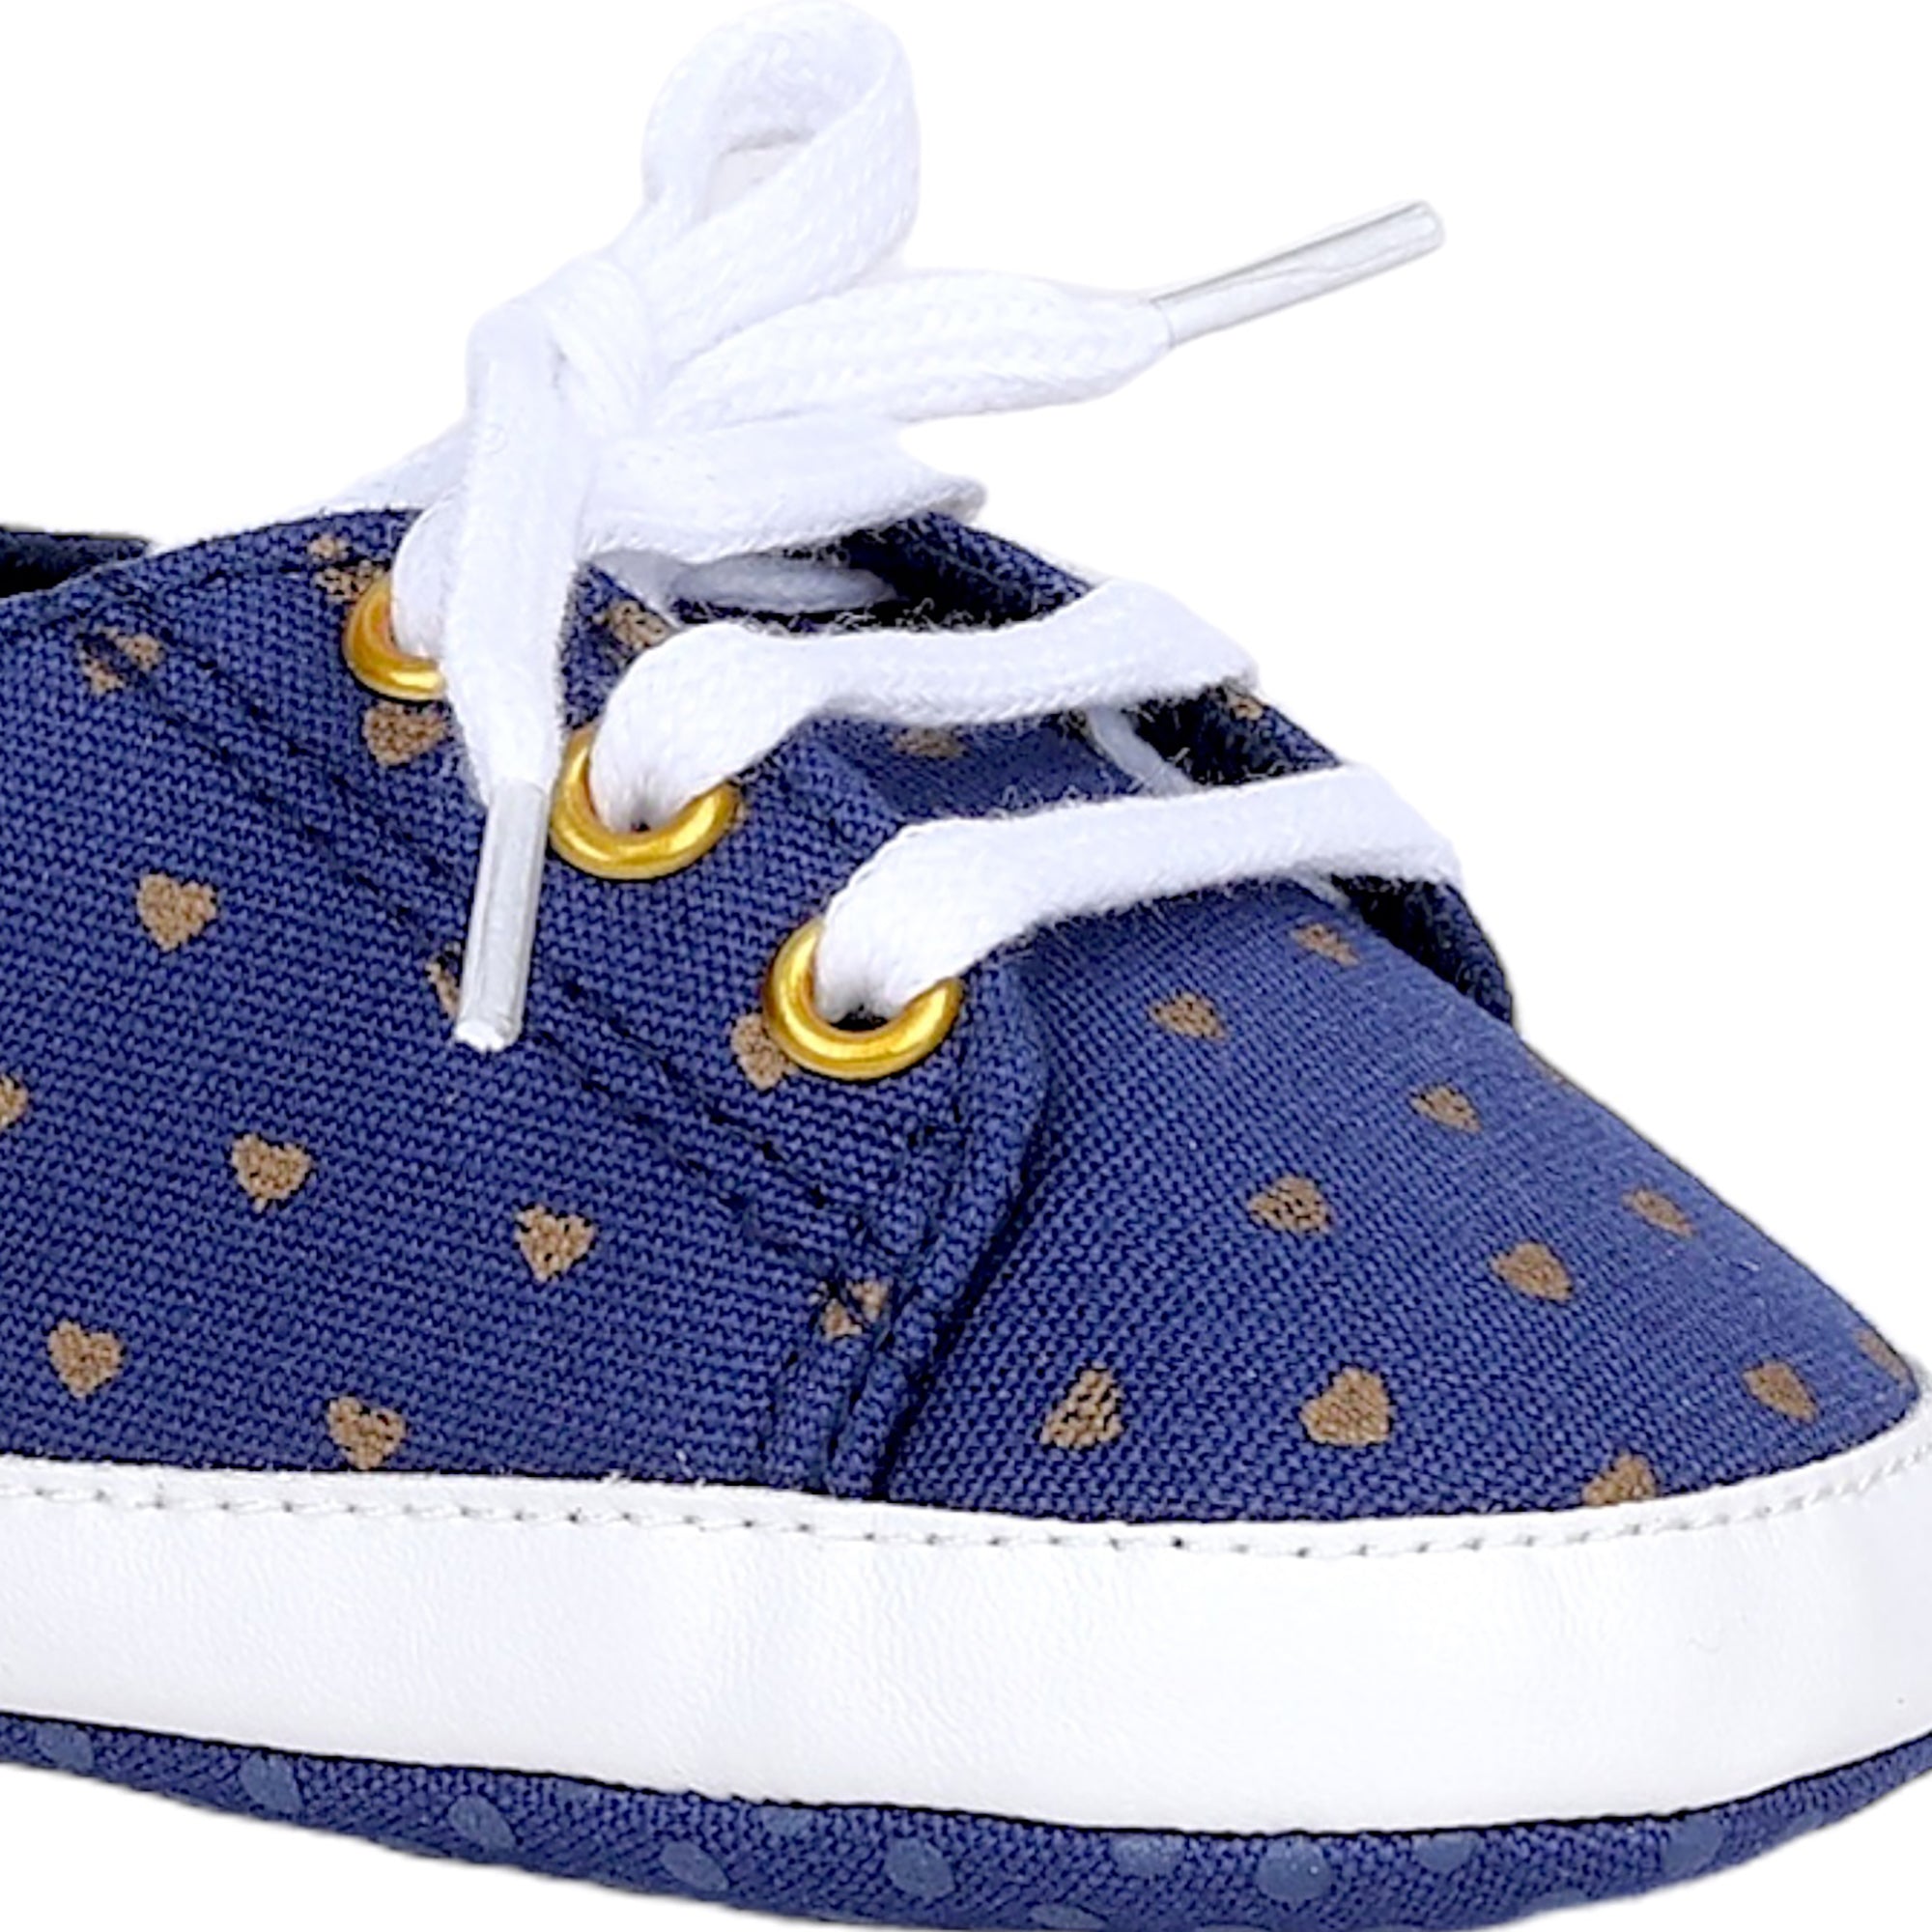 Baby Moo Heart Print Lace-Up Anti-Skid Sneakers - Navy Blue